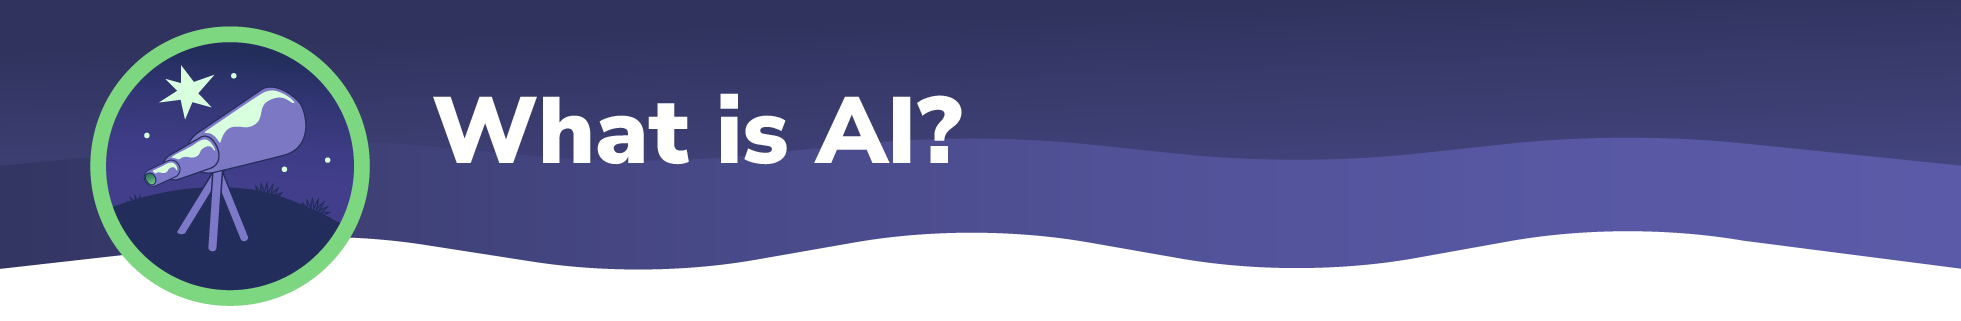 What is AI Banner